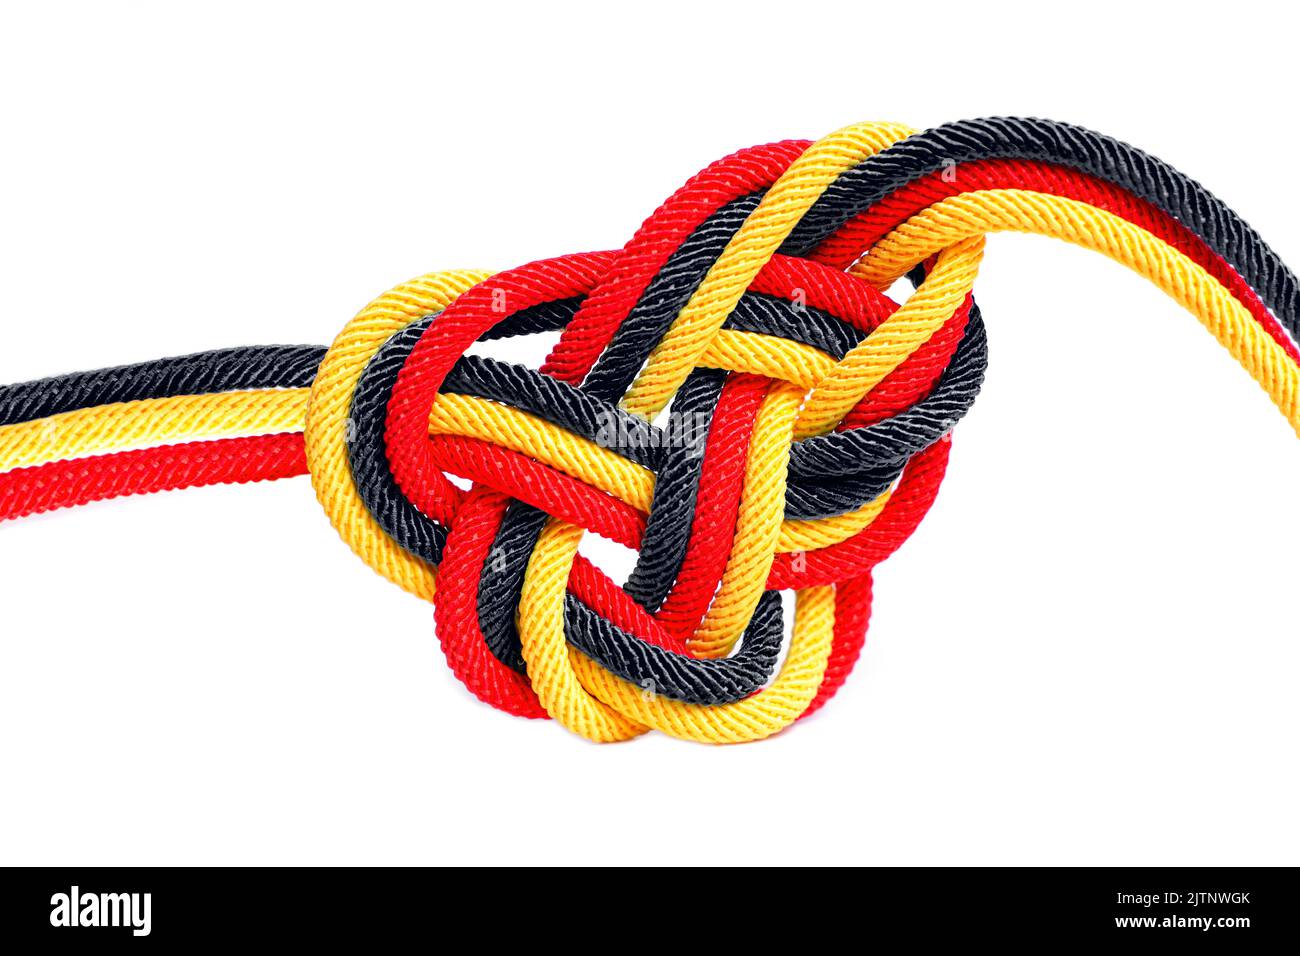 https://c8.alamy.com/comp/2JTNWGK/celtic-love-knot-made-from-multicolored-braided-cords-isolated-on-white-background-creative-allies-concept-2JTNWGK.jpg